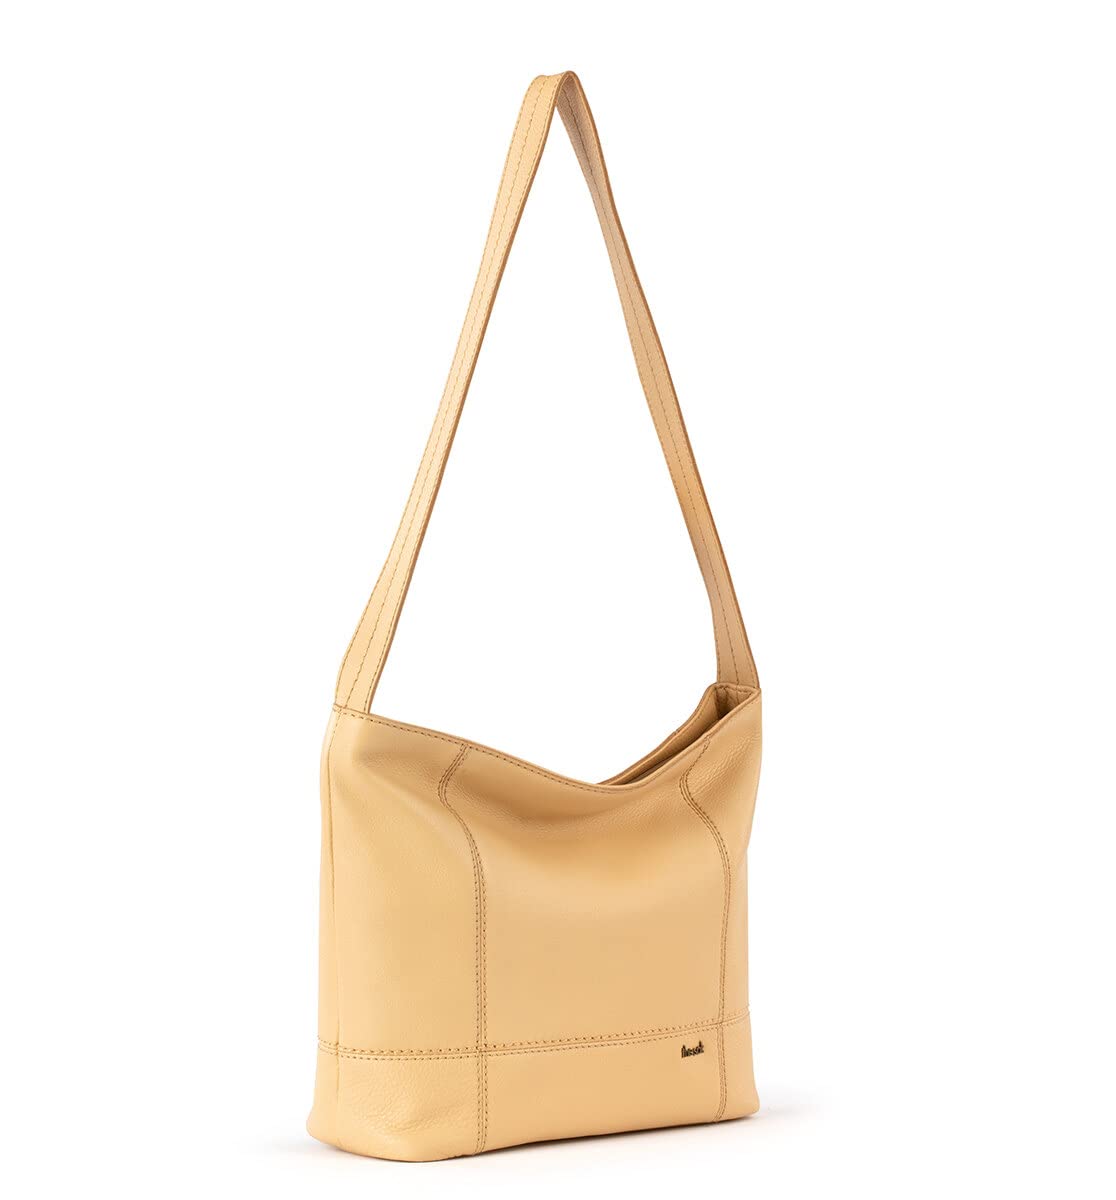 The Sak De Young Hobo Bag in Leather